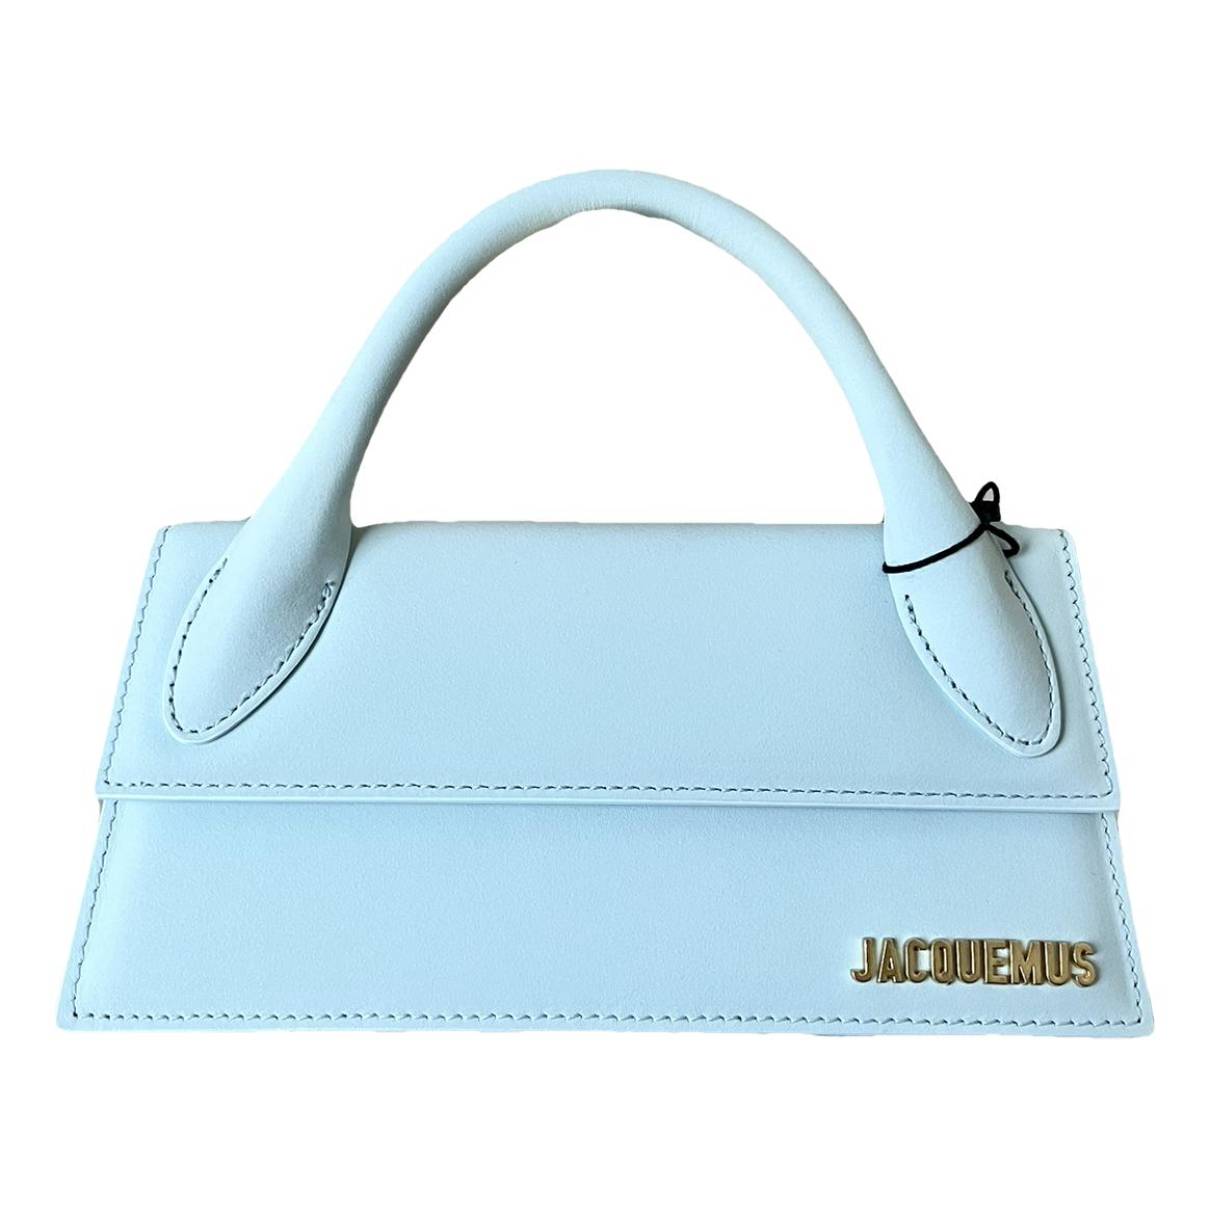 JACQUEMUS Le Chiquito Noeud Bag in Blue